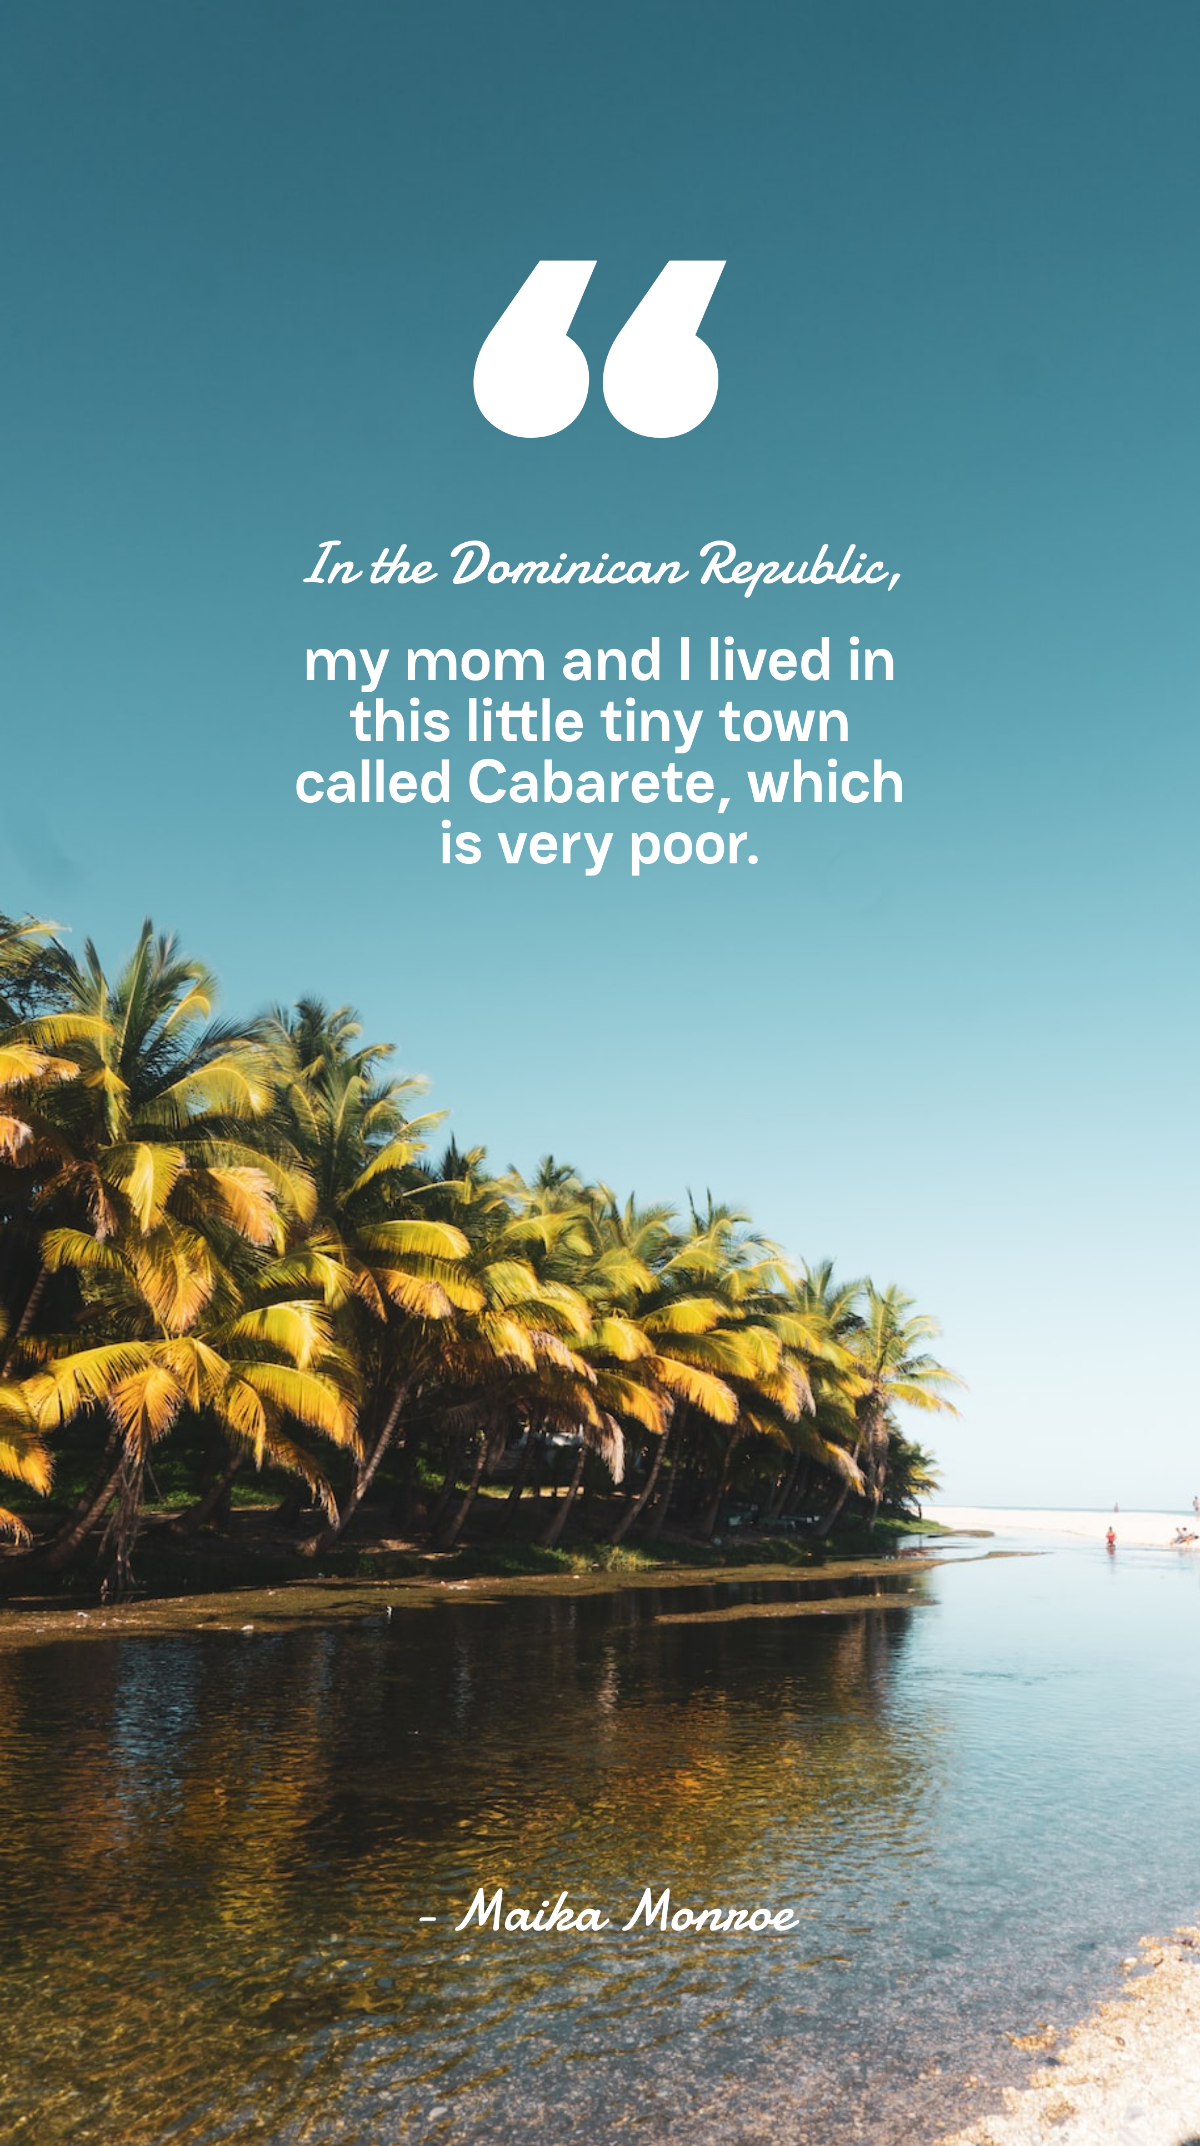 Maika Monroe - In the Dominican Republic, my mom and I lived in this little tiny town called Cabarete, which is very poor. Template